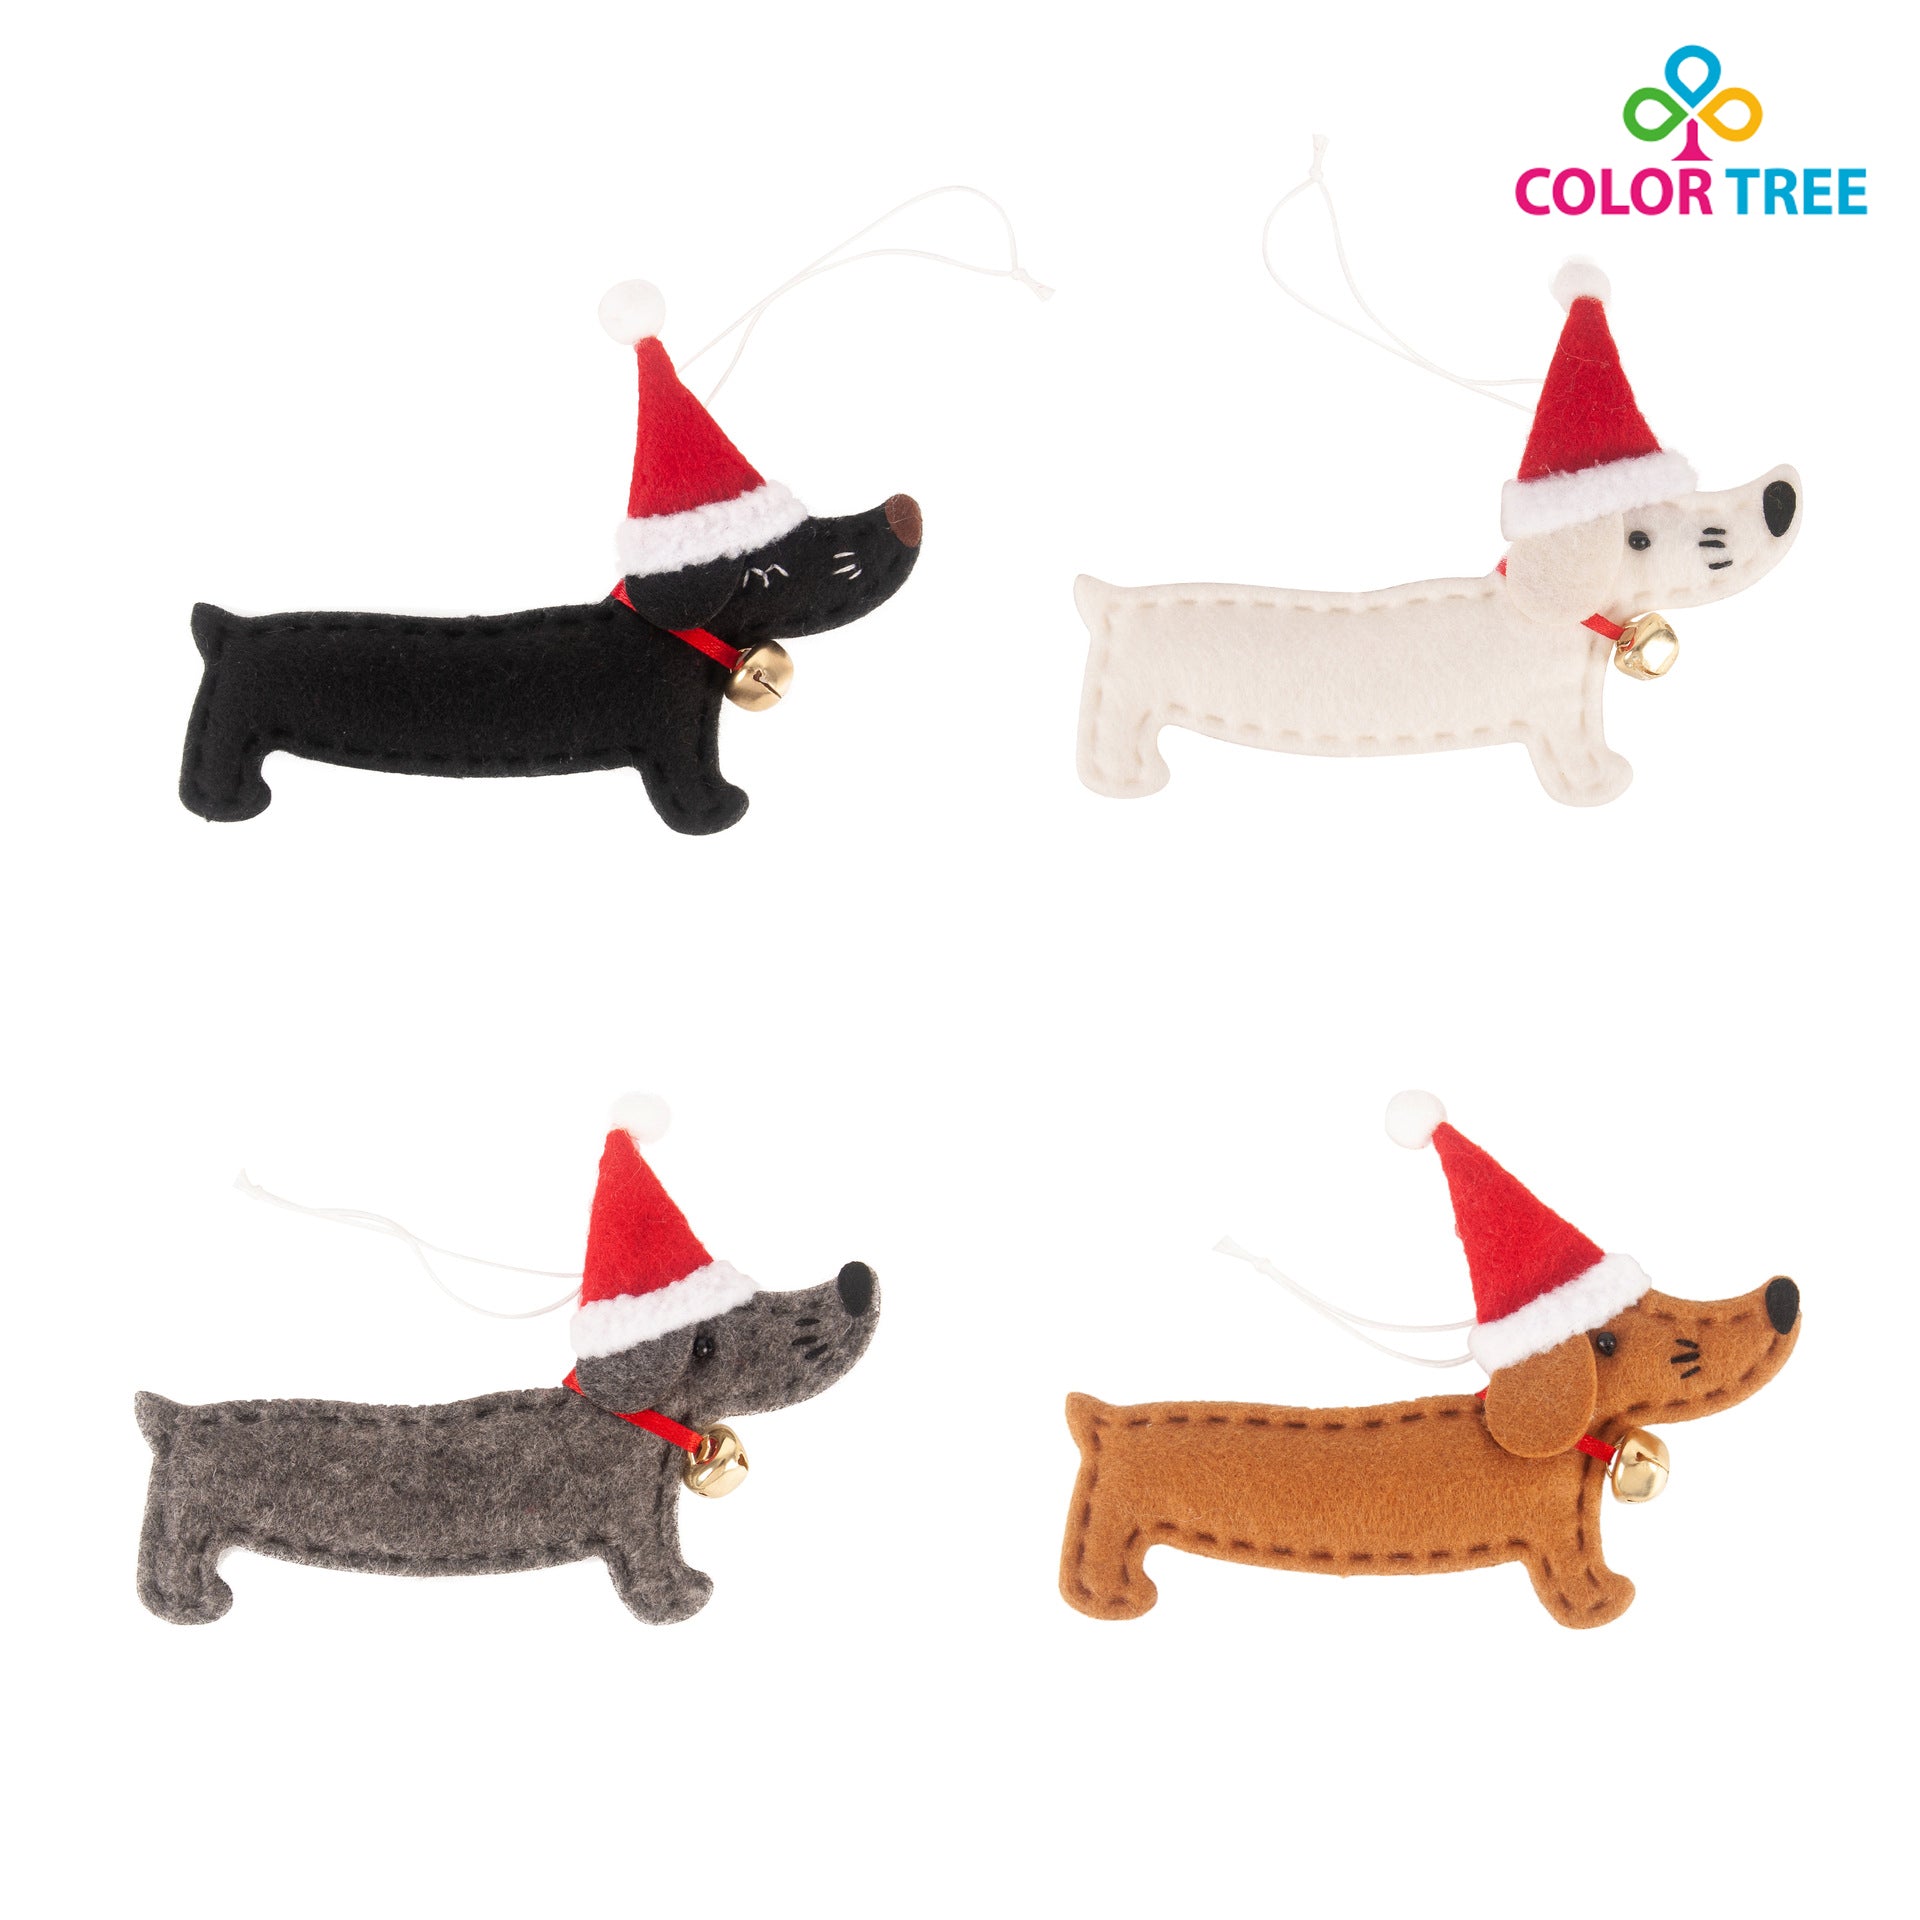 COLOR TREE 4pcs Christmas Tree Hanging Ornaments Dachshund Dog Shape Pendant Christmas Hanging Ornaments for Christmas Banquet Xmas Party